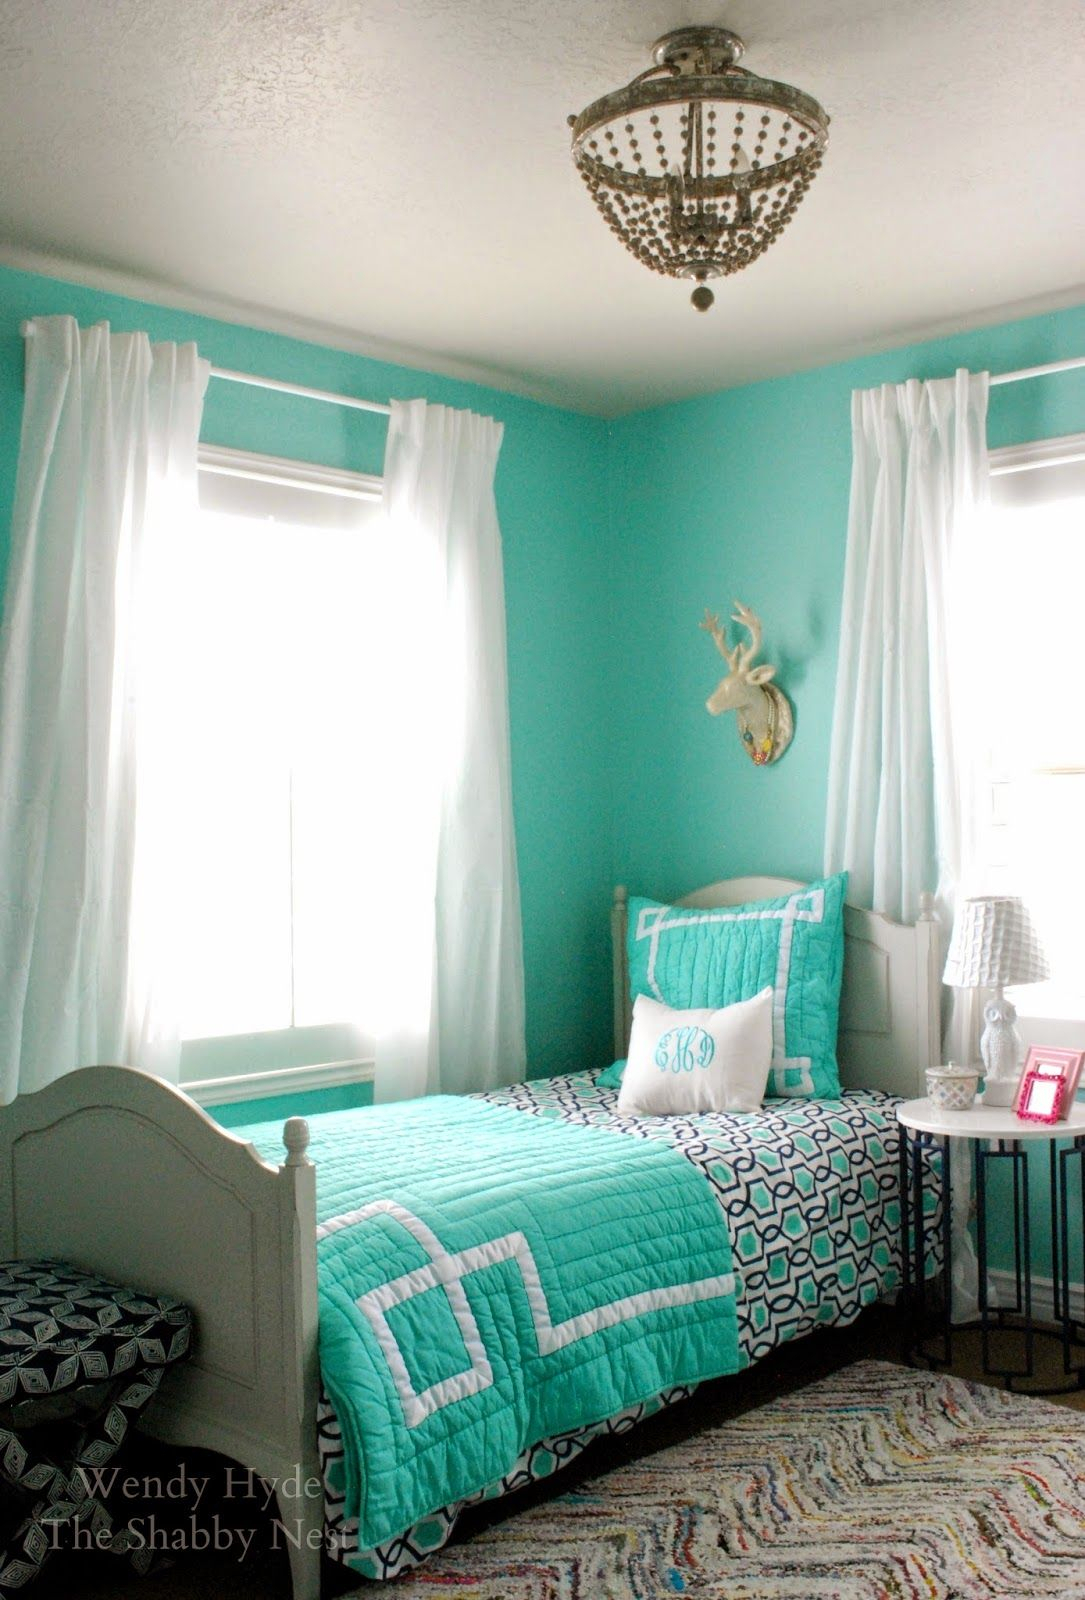 10 Stylish Green And Blue Room Ideas 15 best images about turquoise room decorations bedroom small 2024